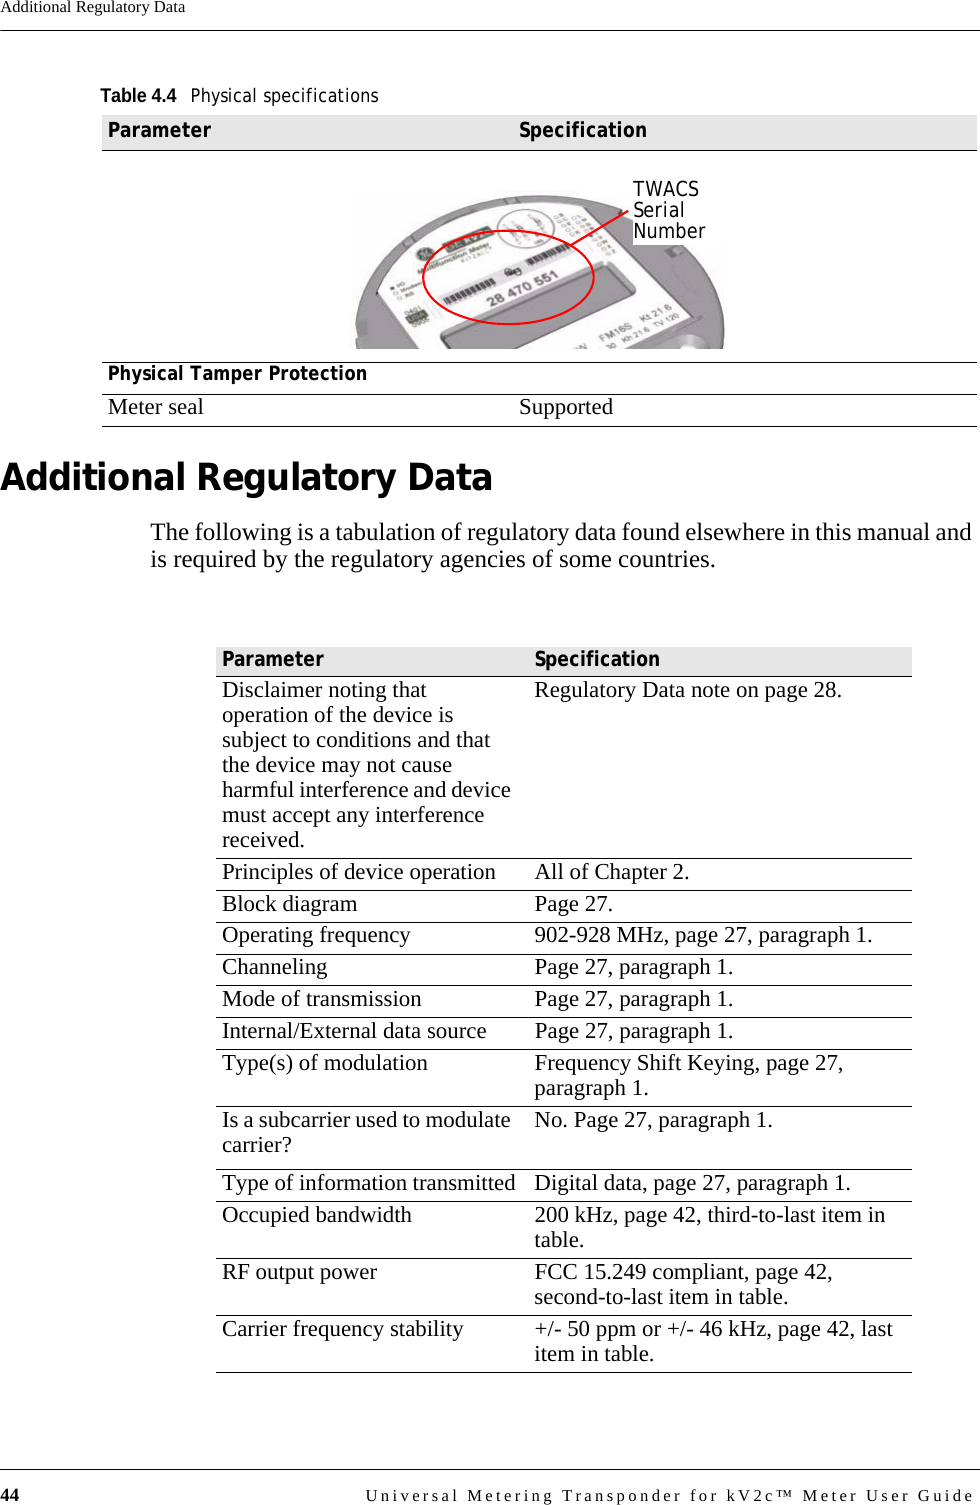 44 Universal Metering Transponder for kV2c™ Meter User GuideAdditional Regulatory DataAdditional Regulatory DataThe following is a tabulation of regulatory data found elsewhere in this manual and is required by the regulatory agencies of some countries.Physical Tamper ProtectionMeter seal SupportedTable 4.4Physical specificationsParameter SpecificationTWACSSerialNumberParameter  SpecificationDisclaimer noting that operation of the device is subject to conditions and that the device may not cause harmful interference and device must accept any interference received.Regulatory Data note on page 28.Principles of device operation  All of Chapter 2.Block diagram Page 27.Operating frequency 902-928 MHz, page 27, paragraph 1.Channeling Page 27, paragraph 1.Mode of transmission Page 27, paragraph 1.Internal/External data source Page 27, paragraph 1.Type(s) of modulation Frequency Shift Keying, page 27, paragraph 1.Is a subcarrier used to modulate carrier? No. Page 27, paragraph 1.Type of information transmitted Digital data, page 27, paragraph 1.Occupied bandwidth 200 kHz, page 42, third-to-last item in table.RF output power FCC 15.249 compliant, page 42, second-to-last item in table.Carrier frequency stability +/- 50 ppm or +/- 46 kHz, page 42, last item in table.